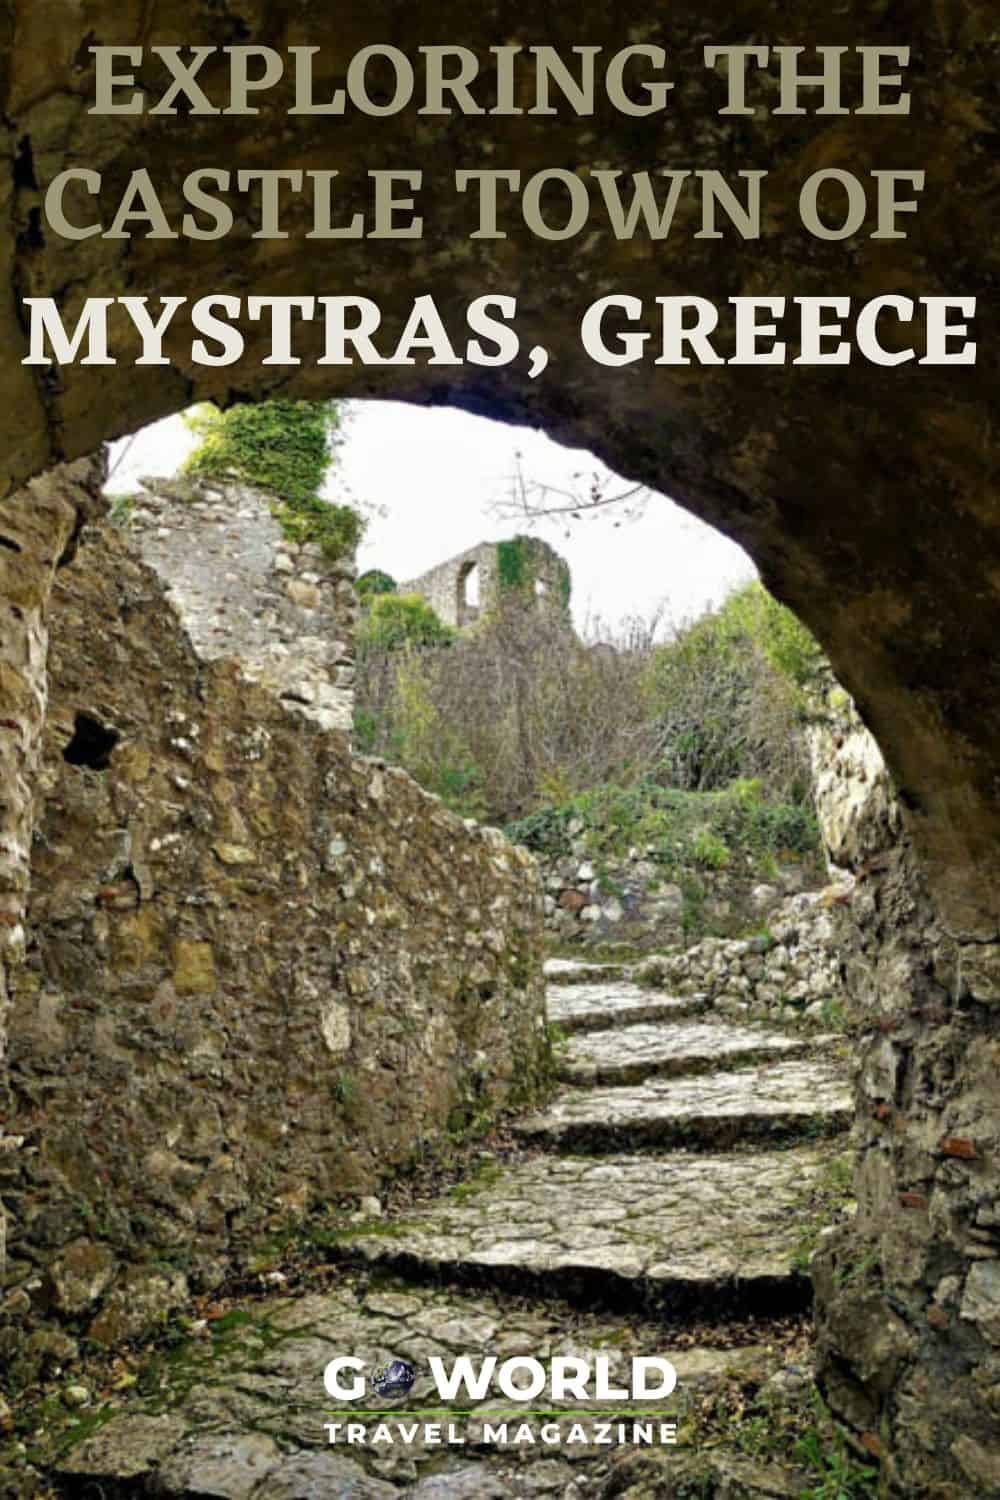 The ancient town of Mystras, Greece is a place to immerse yourself in history through the many impressive castles, churches and monasteries. #Greece #Peloponeese #ancientgreece